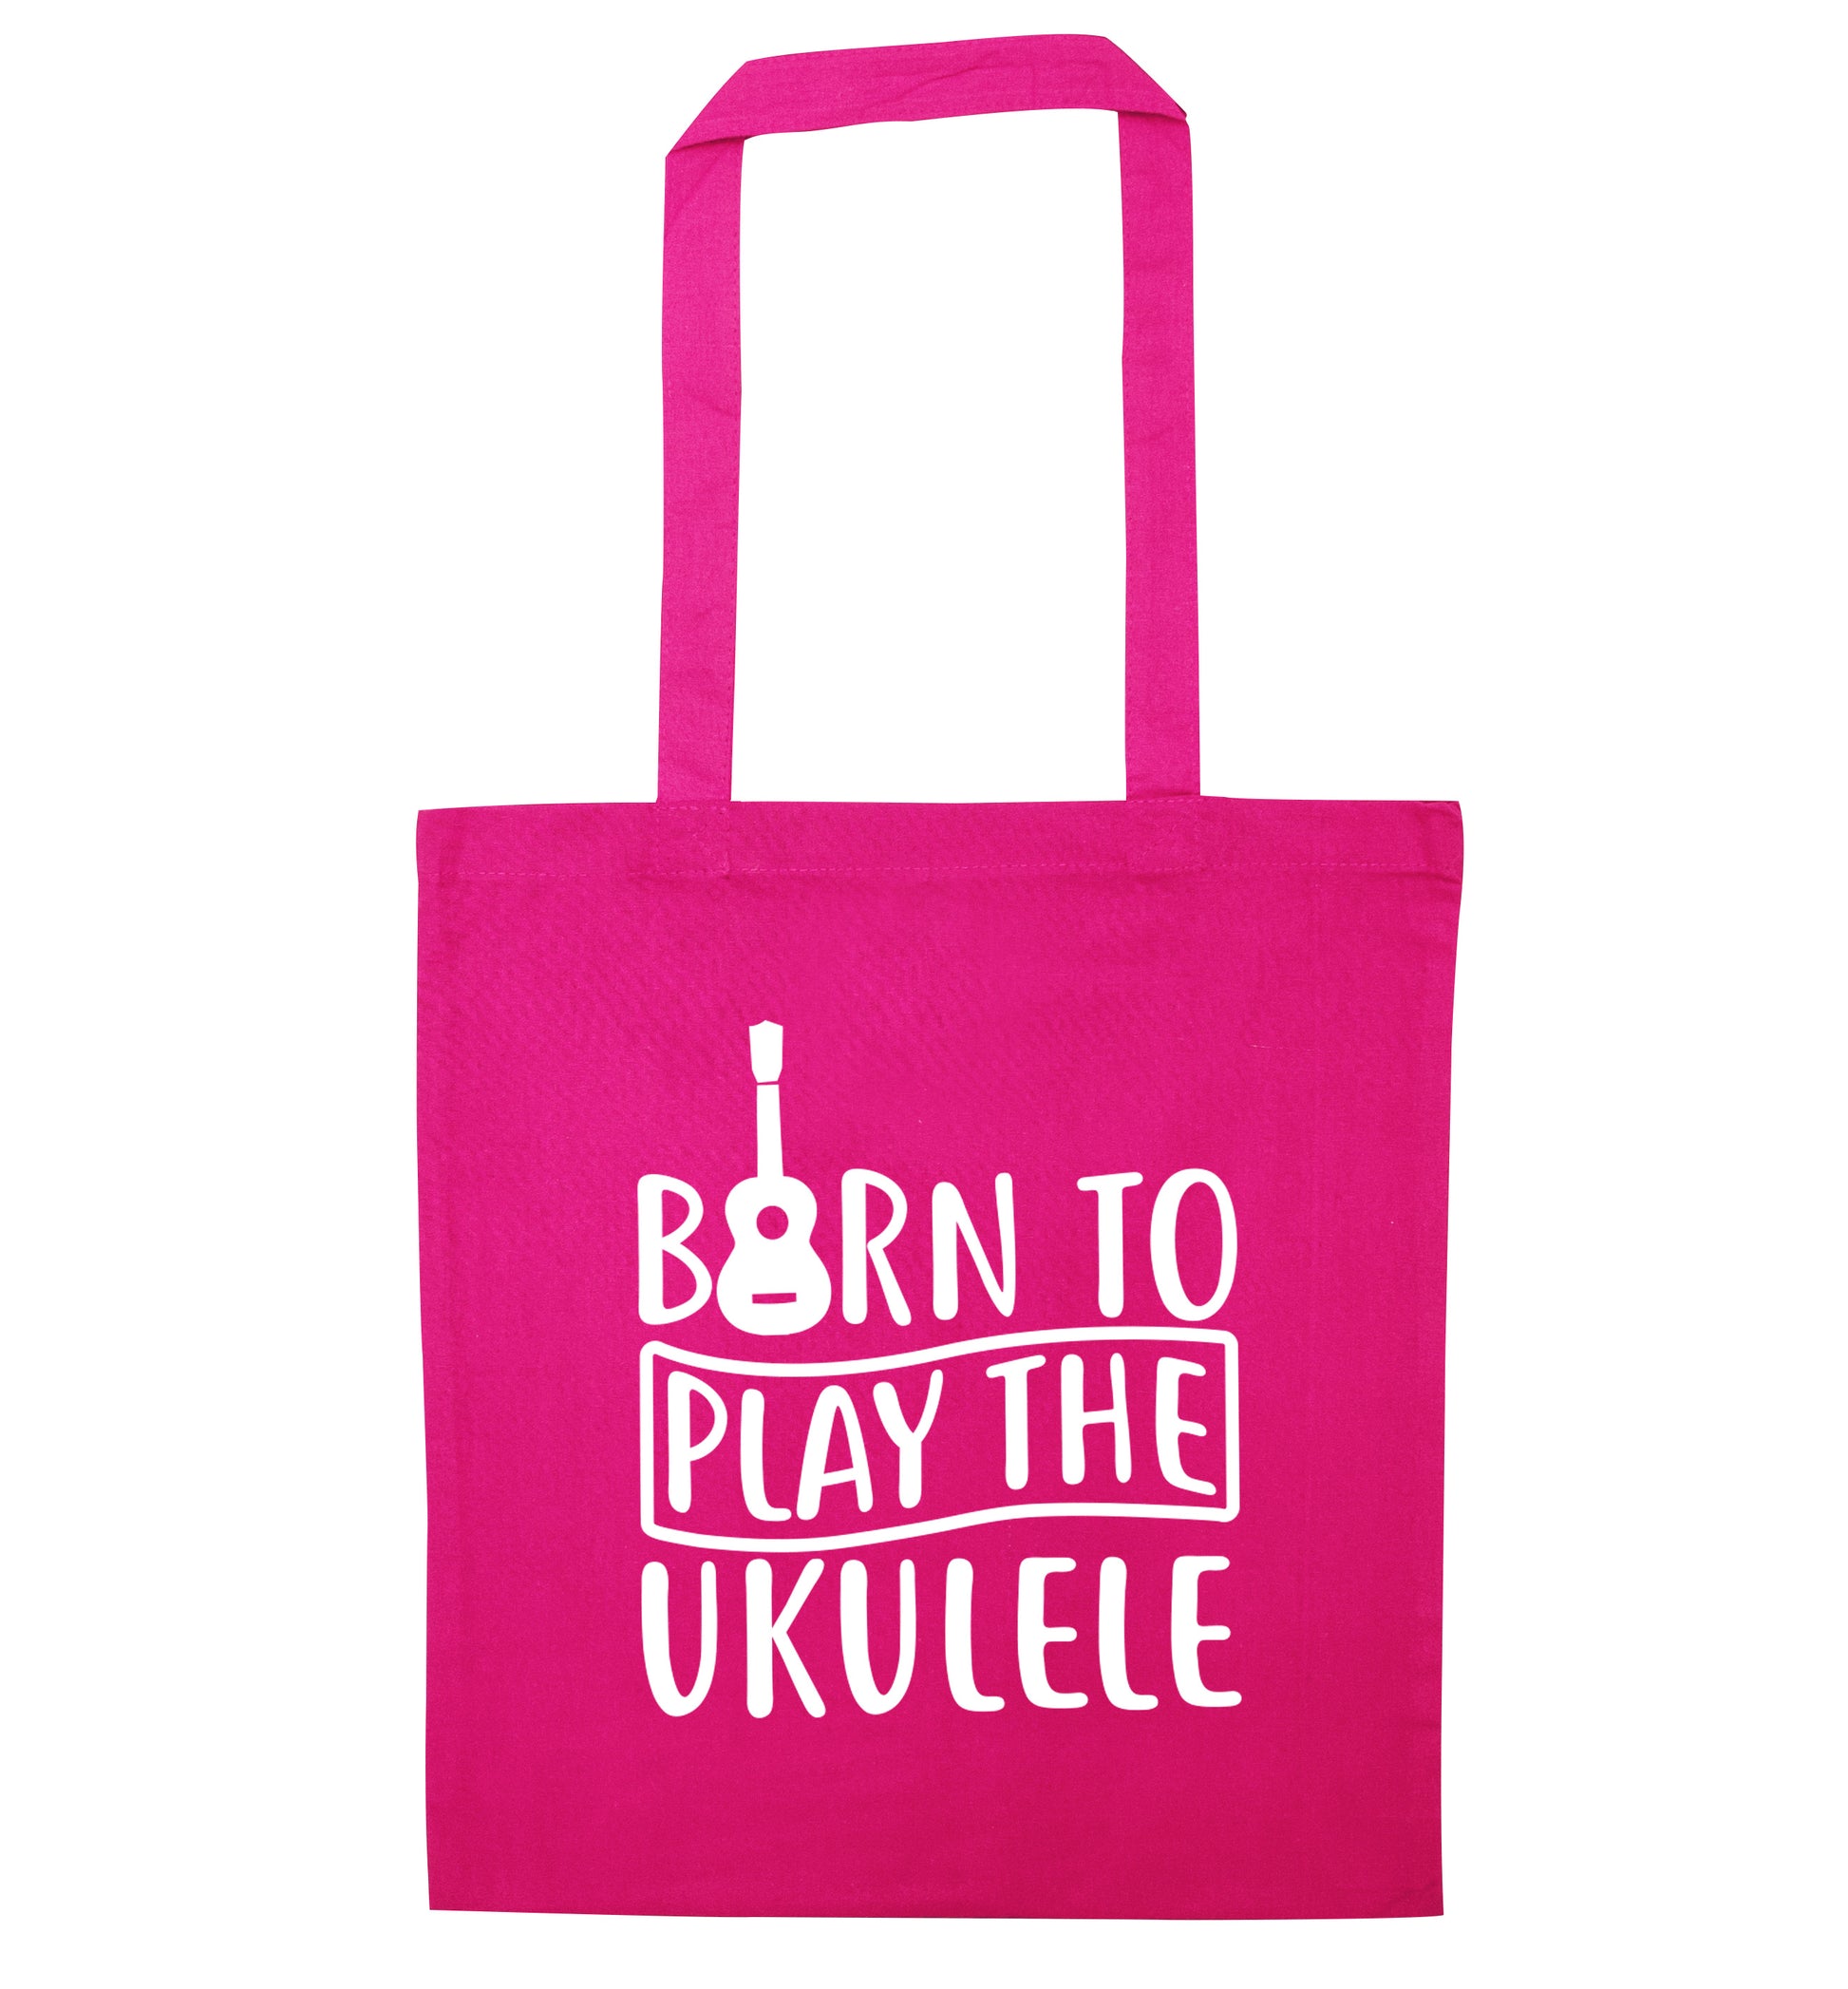 Born to play the ukulele pink tote bag